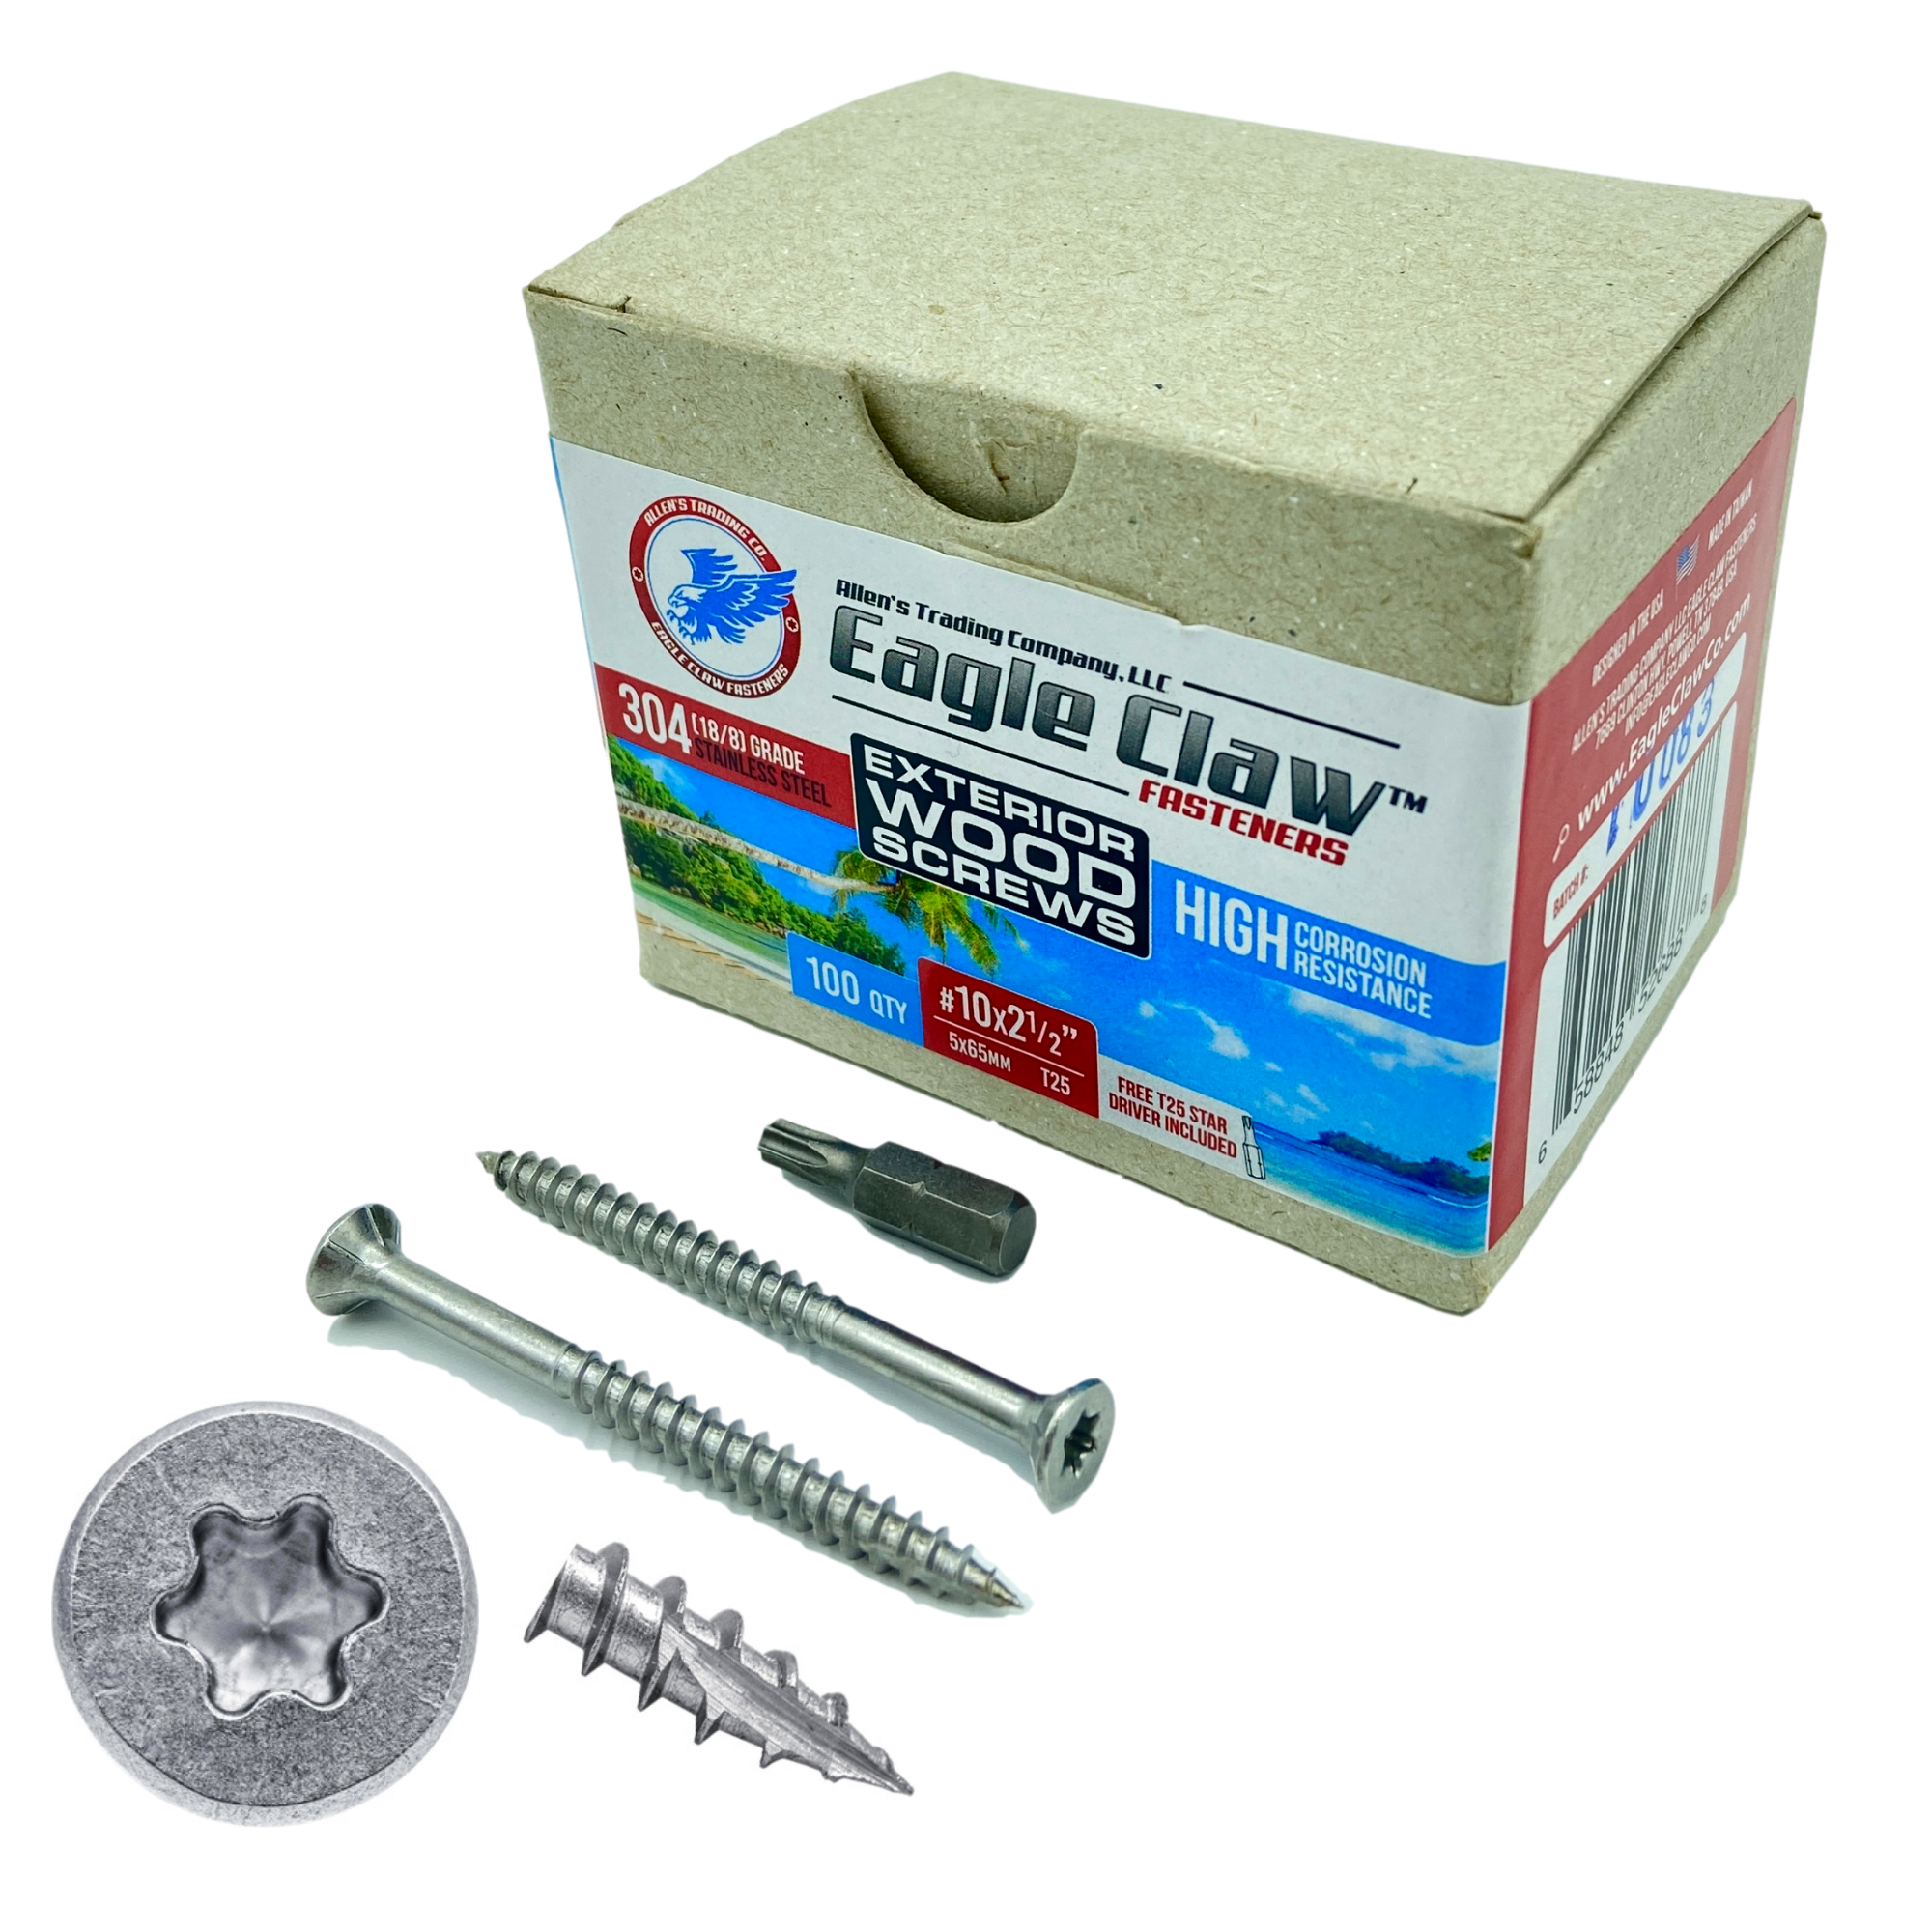 #10 × 2.5 Inch 304 Grade Stainless Steel Deck Screws by Allen's Trading Co. Eagle Claw Fasteners